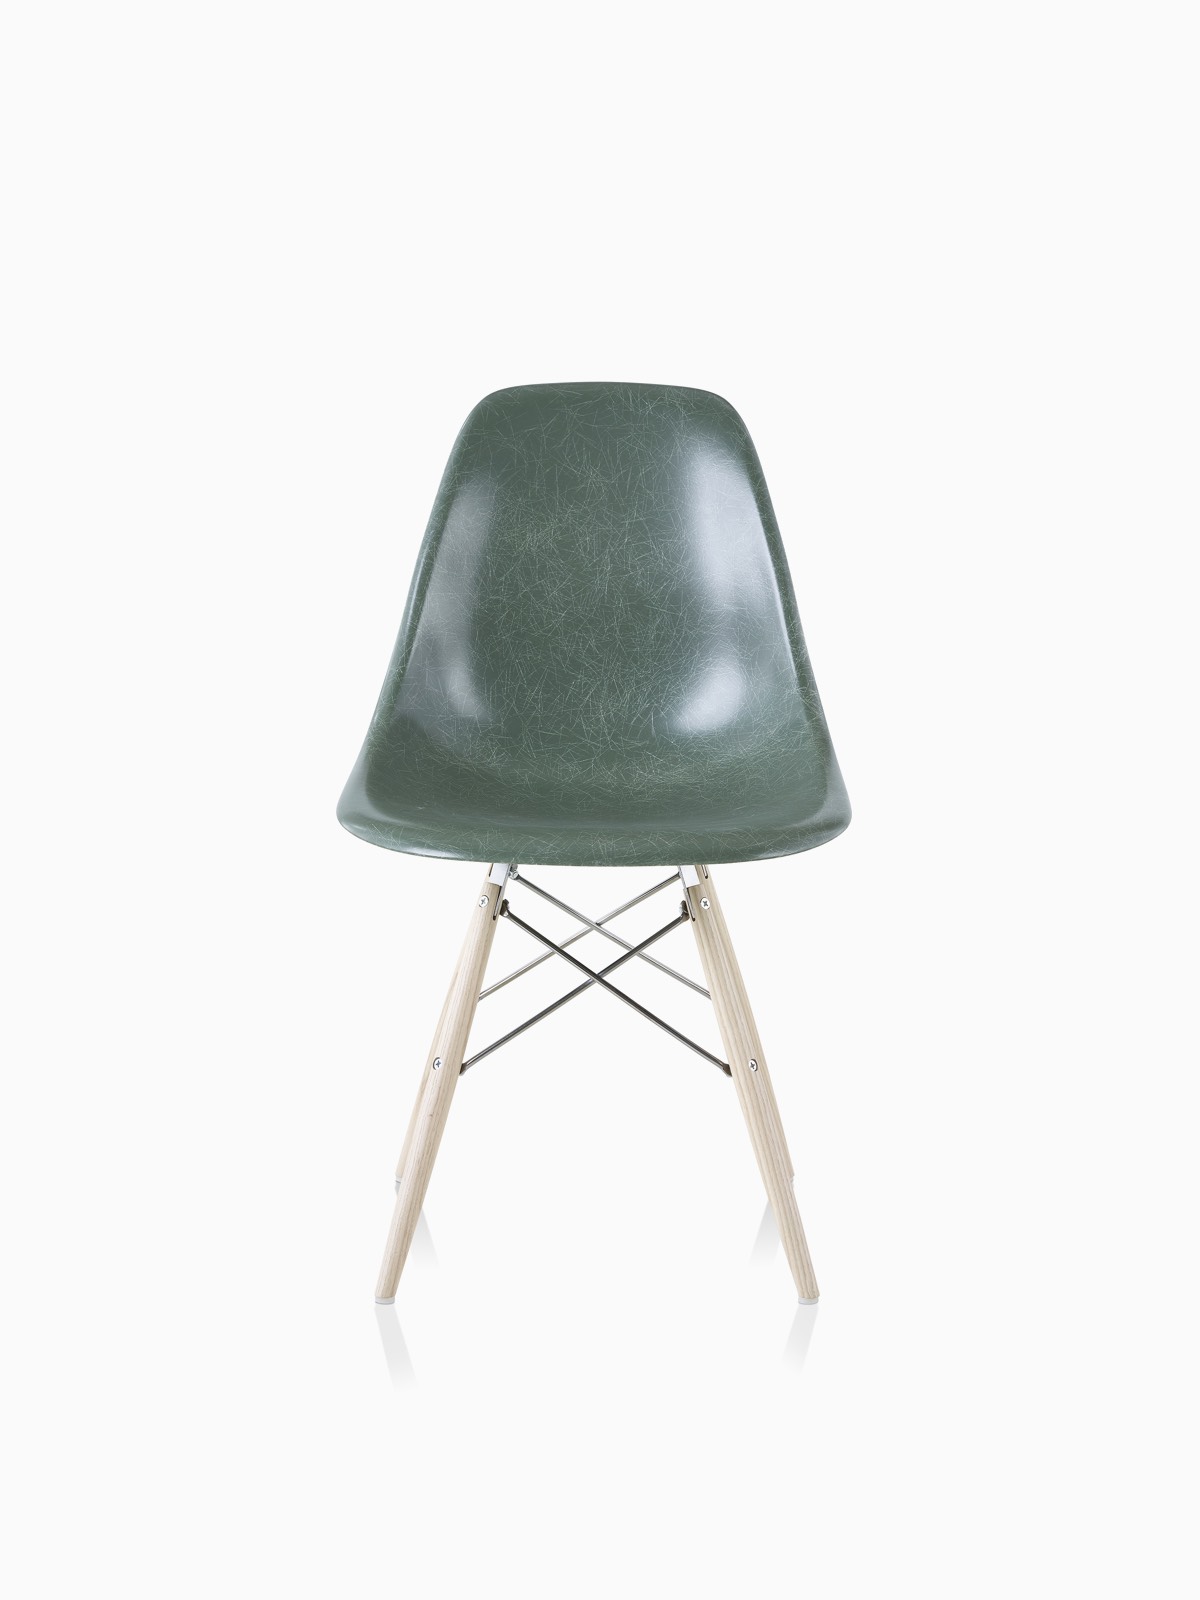 Details about   Authentic Herman Miller® Eames® Molded Plastic ChairDWR 